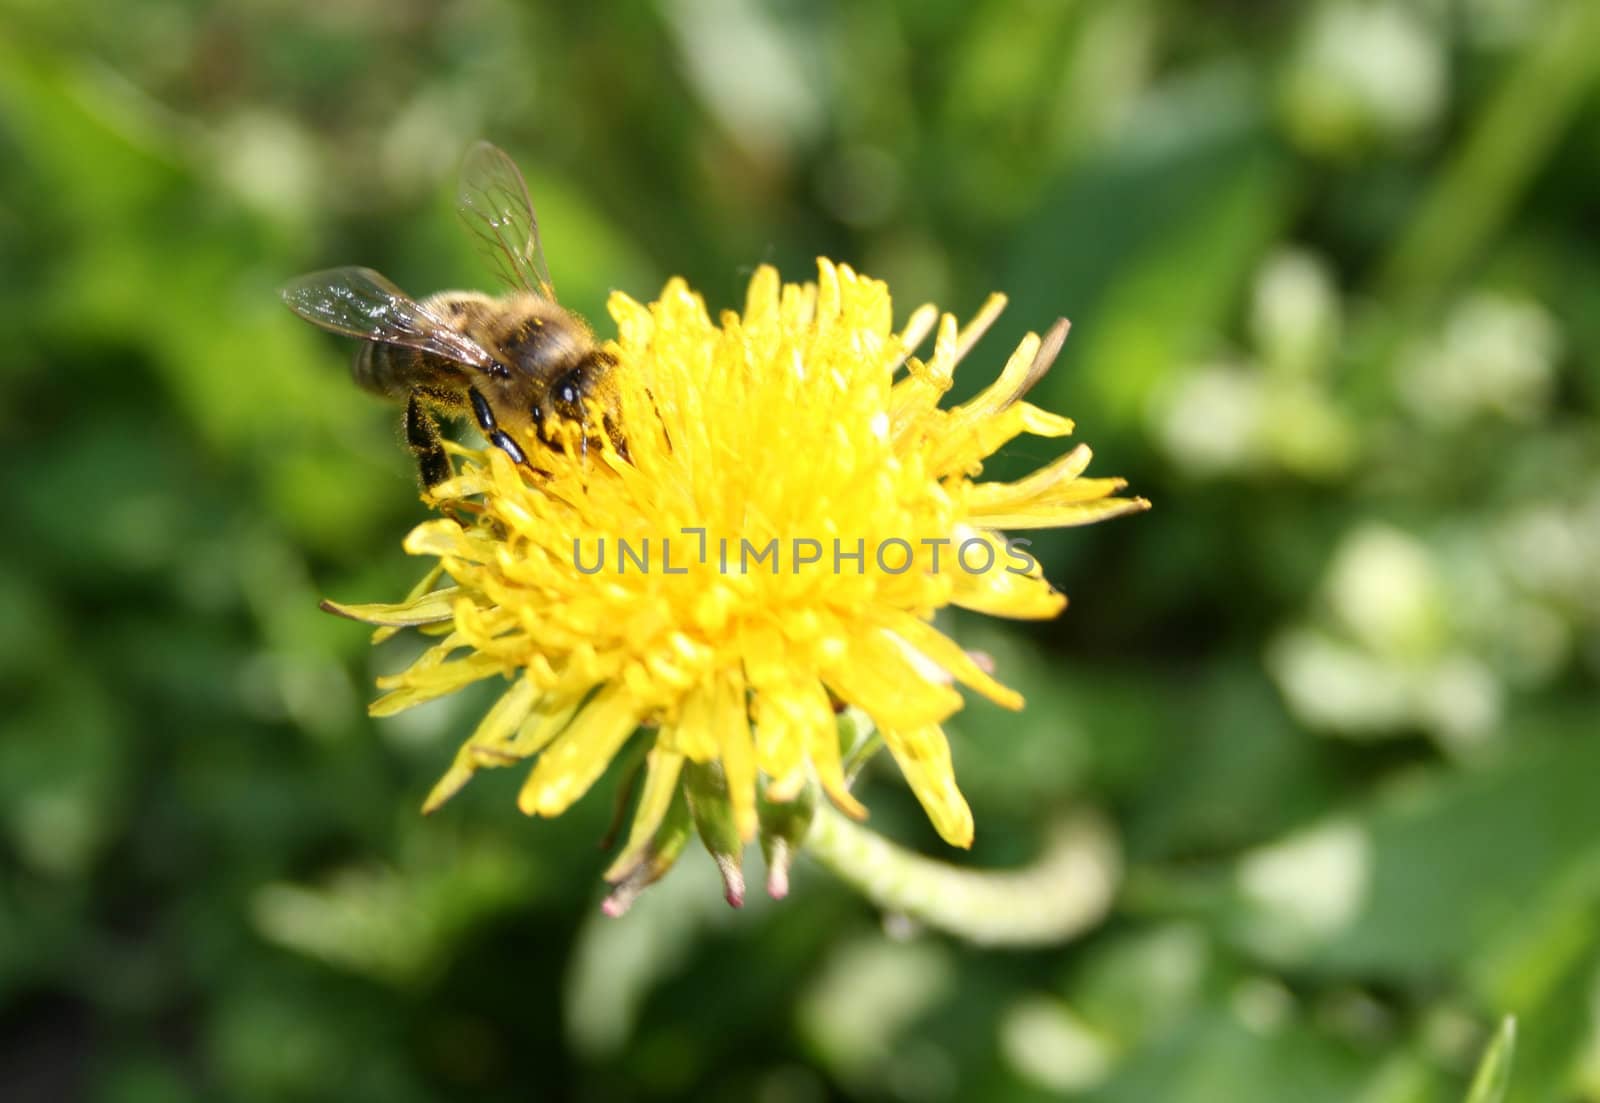 The bee sits on a yellow dandelion.